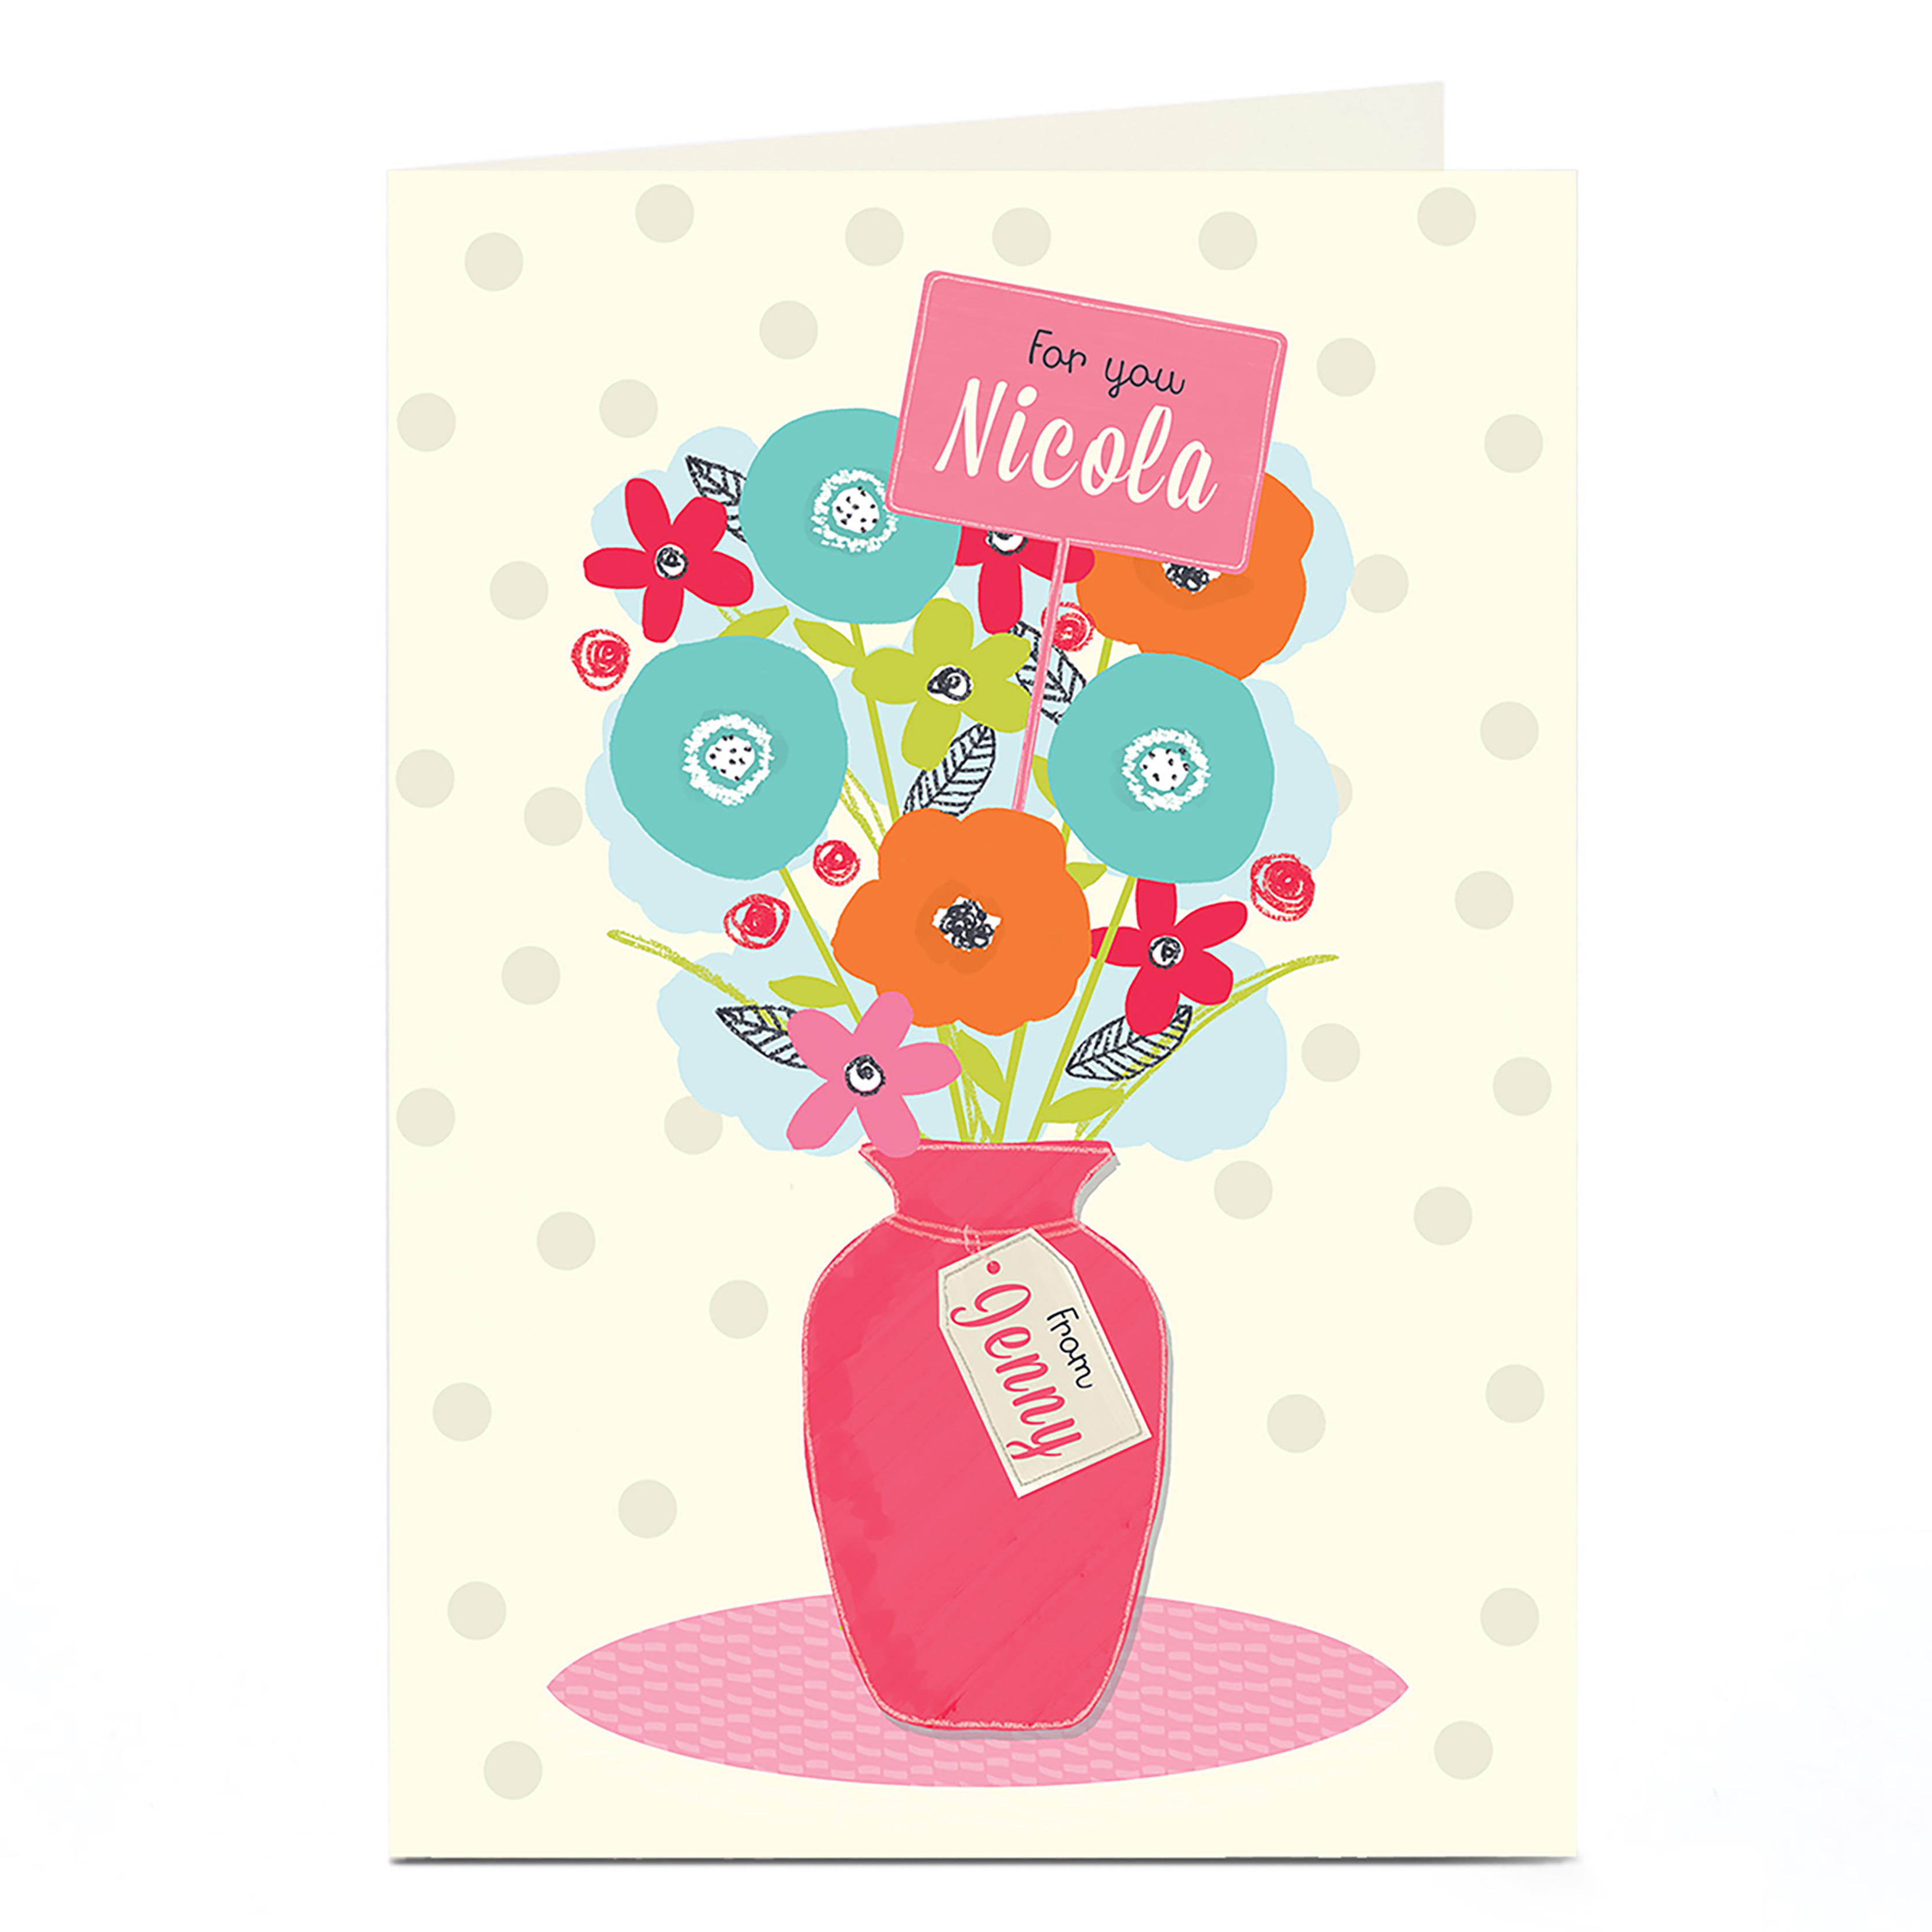 Personalised For You Card - Flowers In Pink Vase